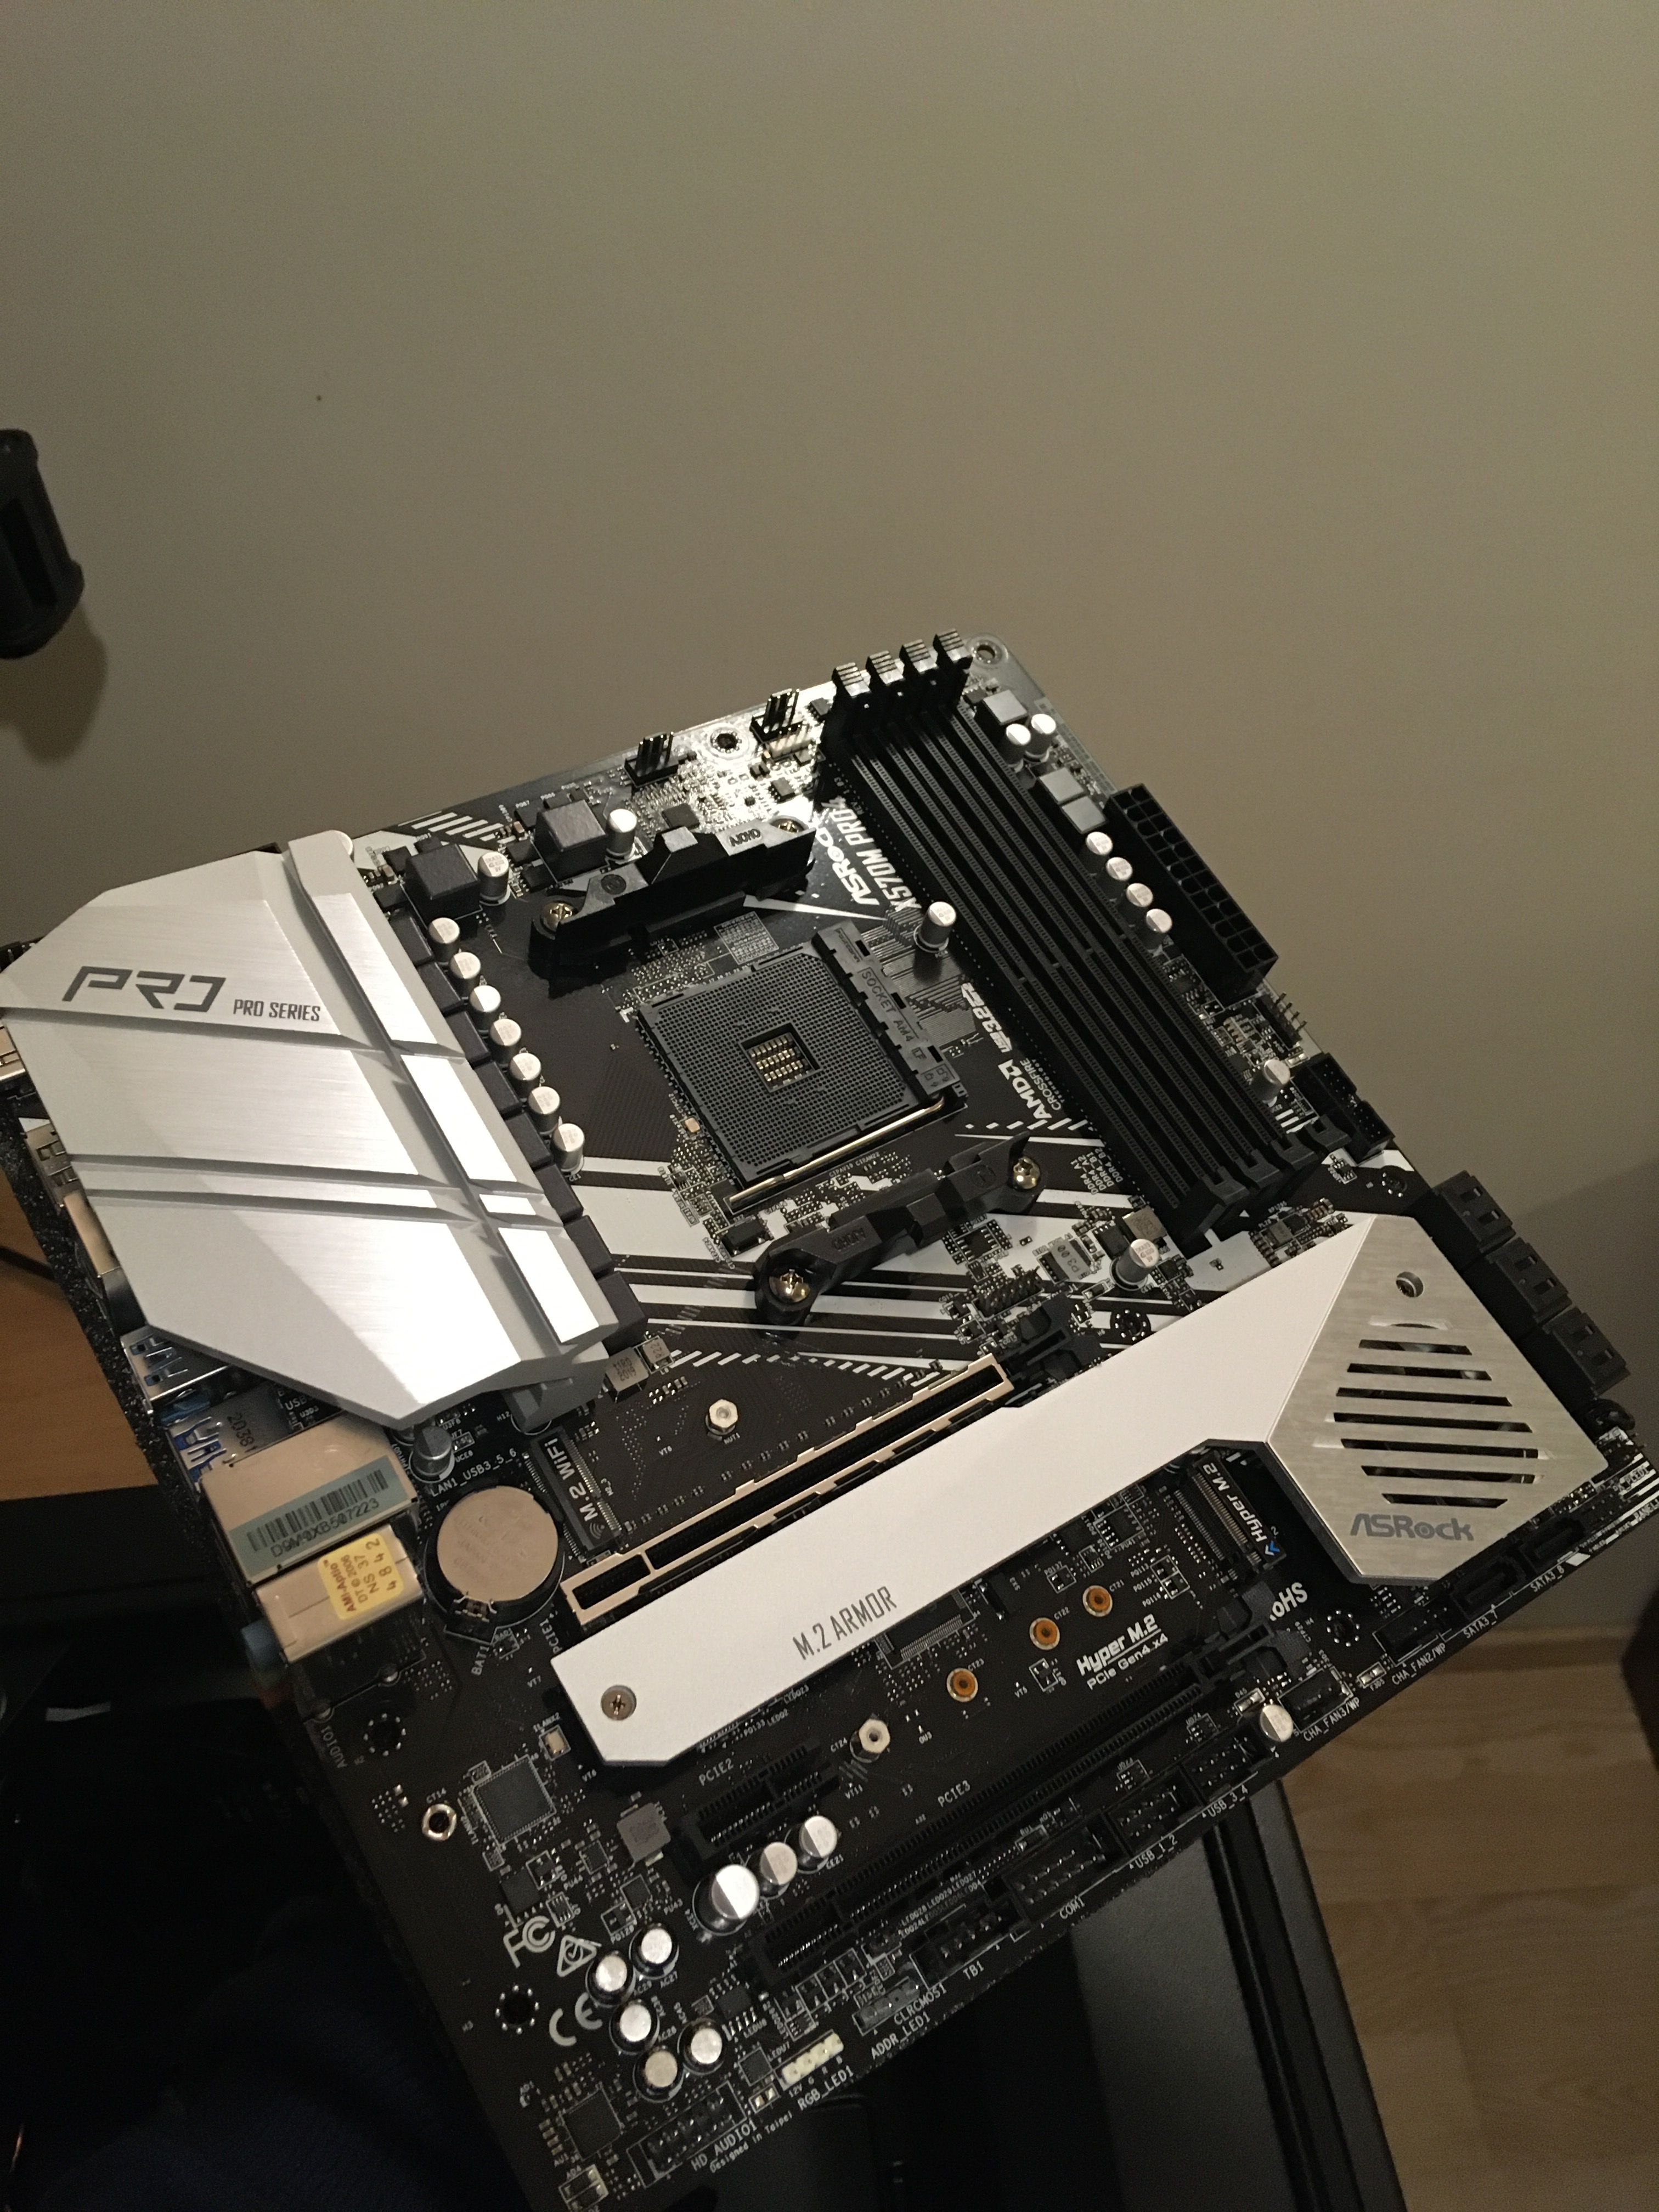 ASRock X570M Pro4 motherboard overview :: ./techtipsy — Herman's blog